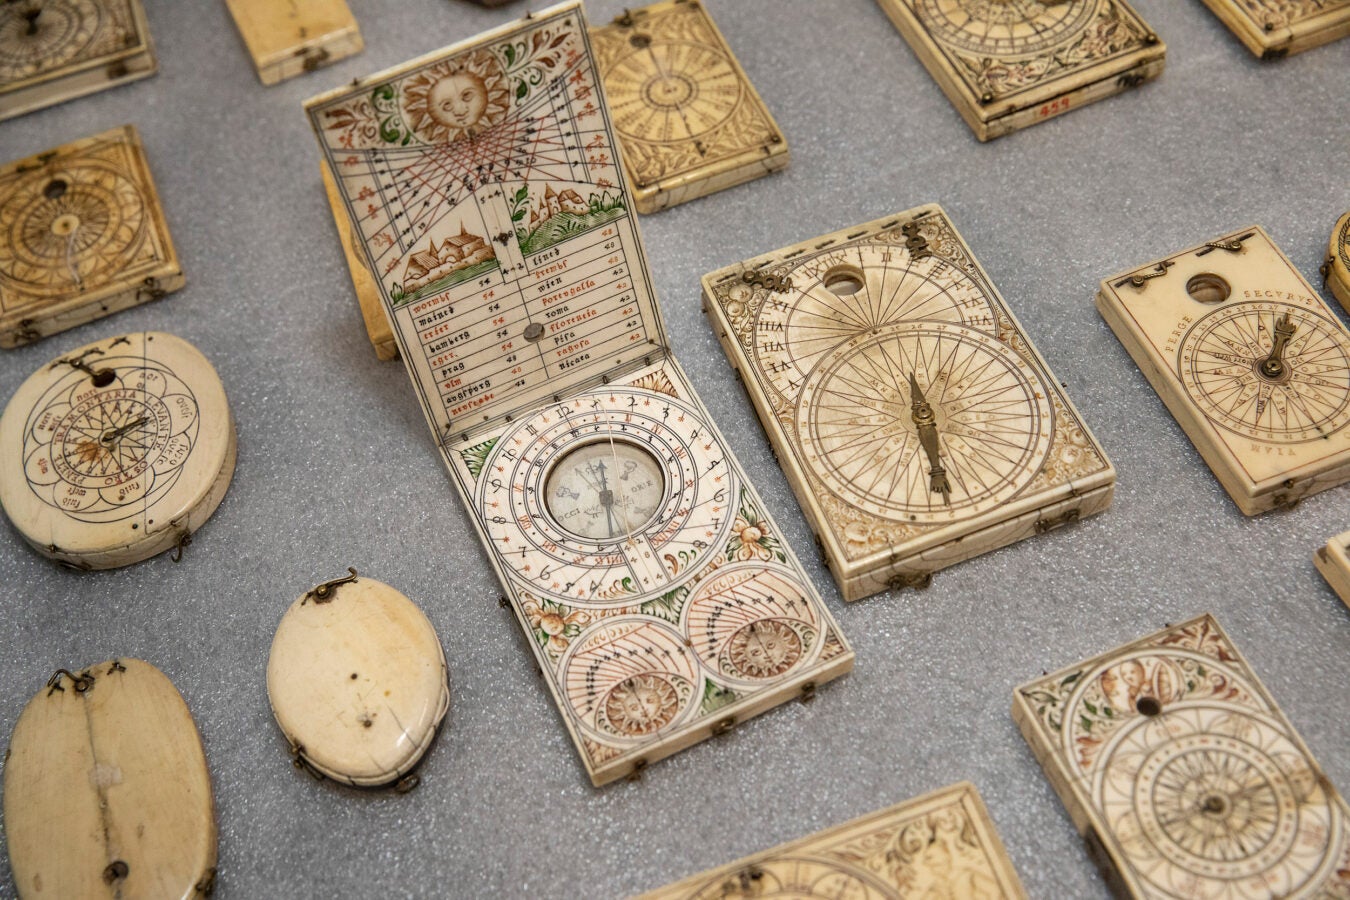 Picture of different kinds of ivory pocket sundials.